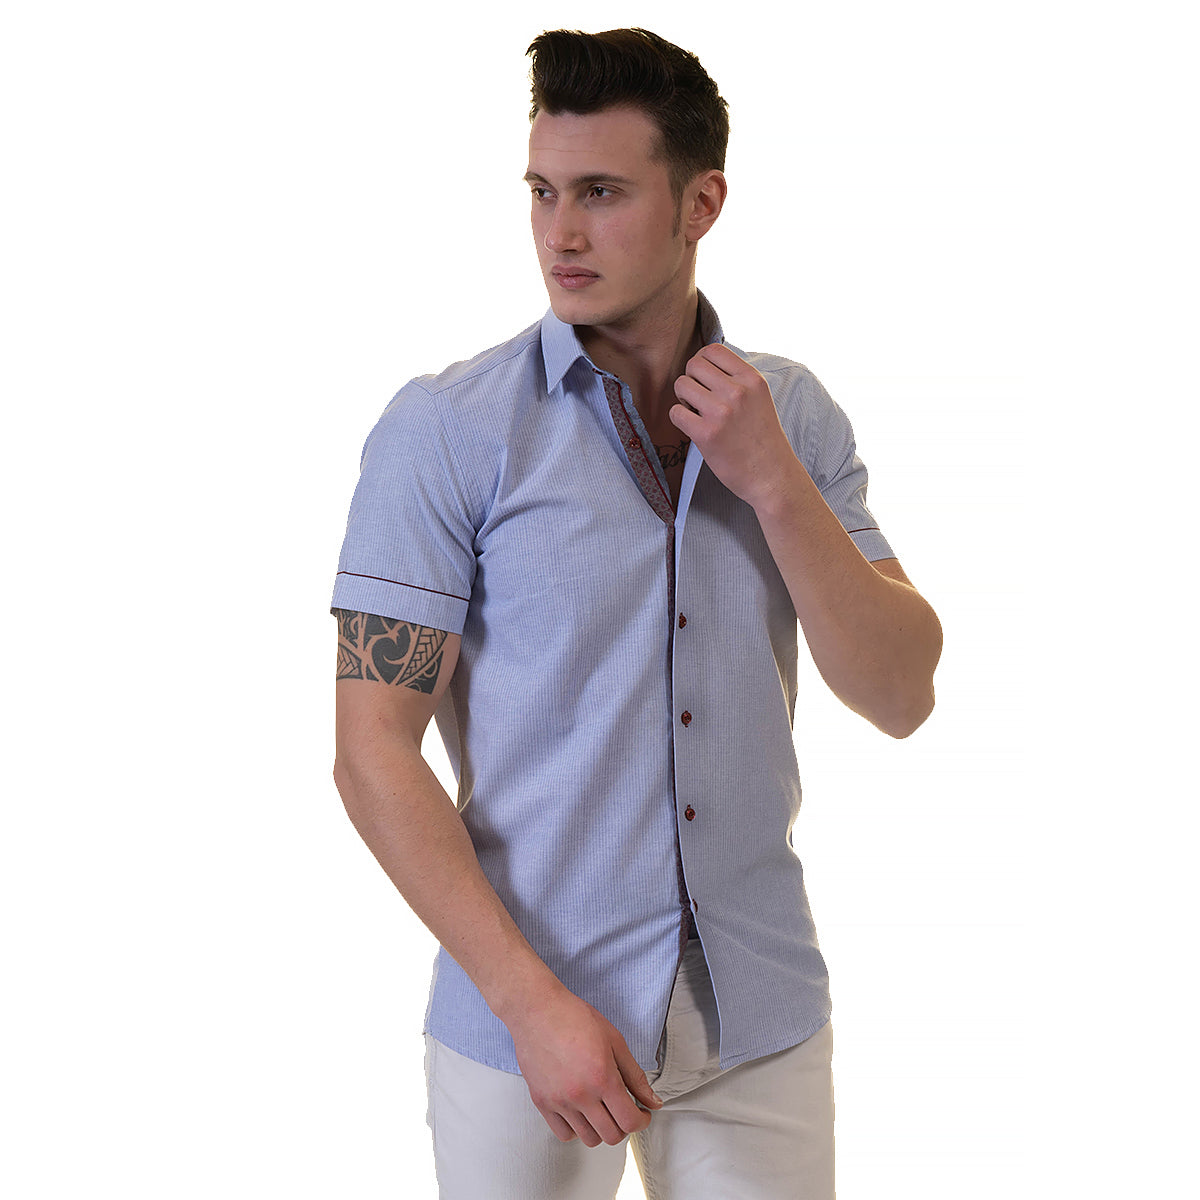 Mens Sky Blue Short Sleeve Button up Shirts - Tailored Slim Fit Cotton Dress Shirts